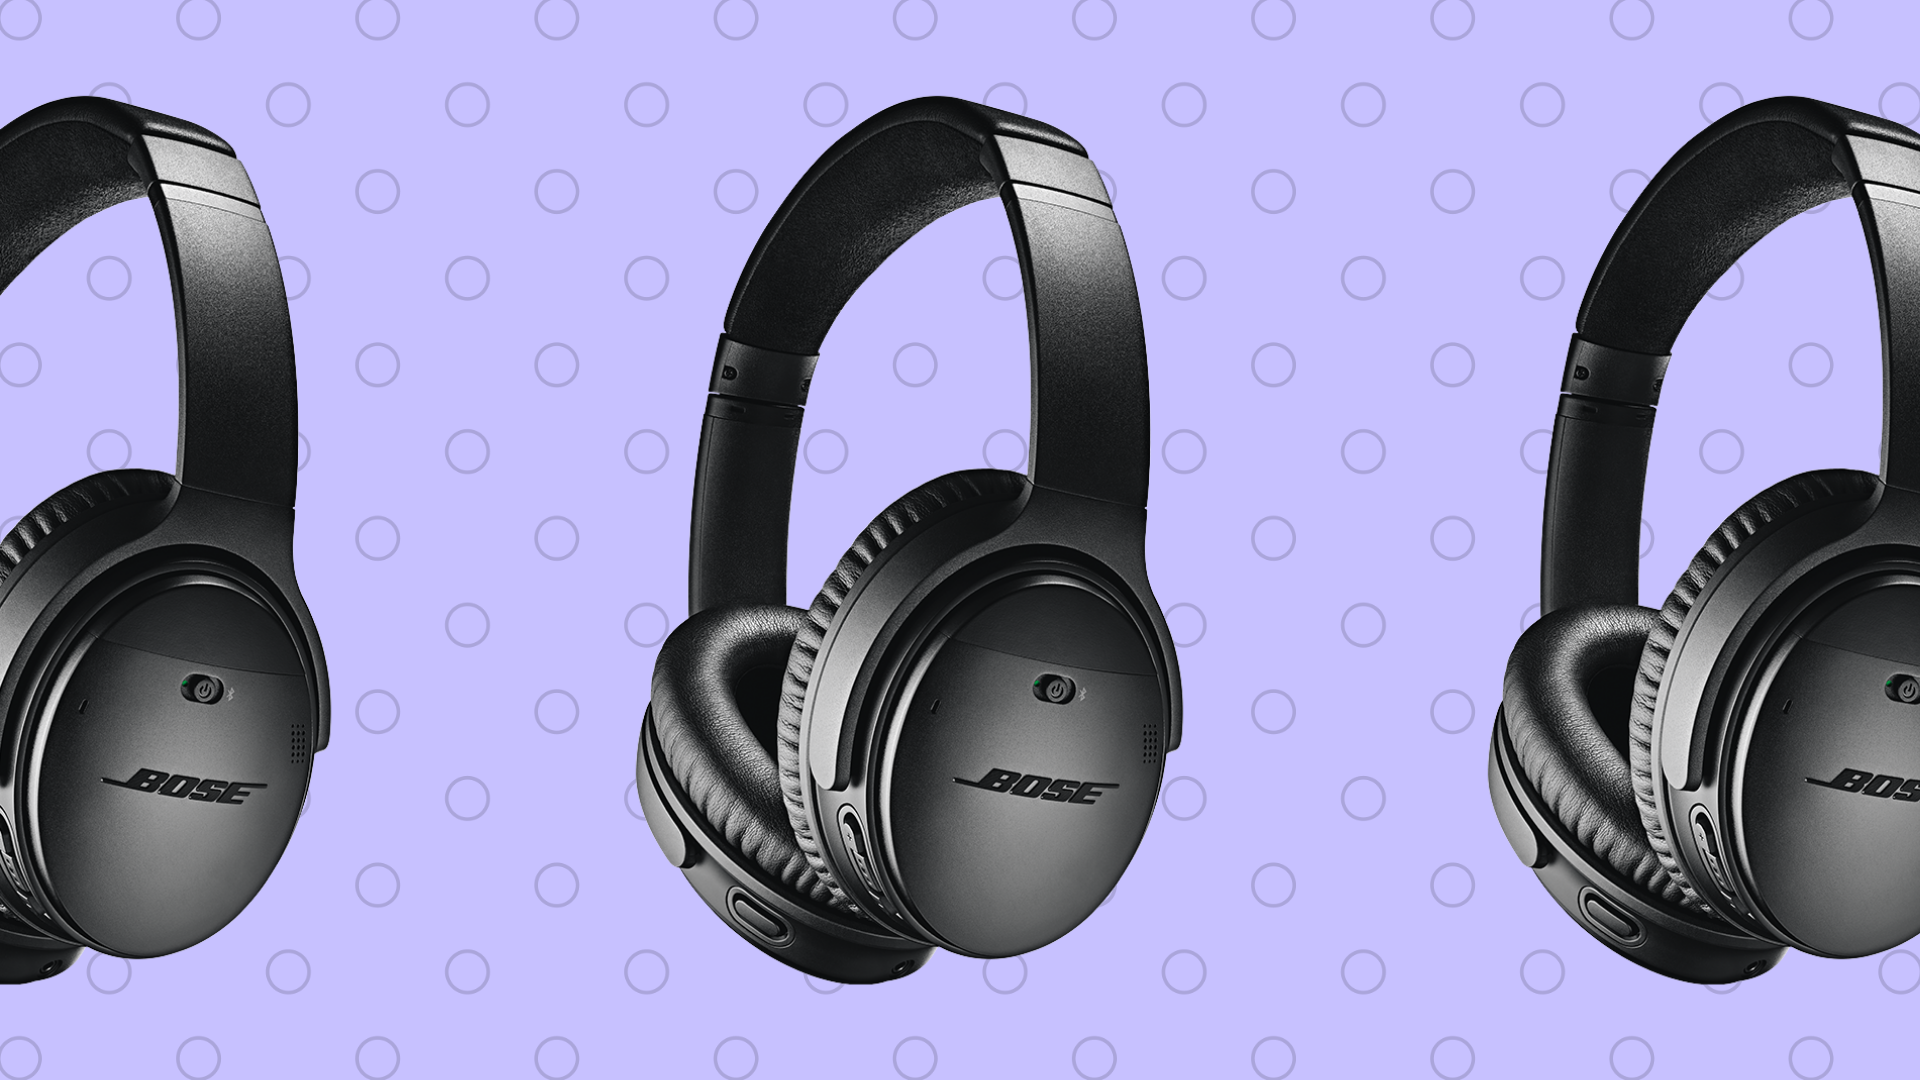 Best early Black Friday deals on headphones are happening right now at Walmart